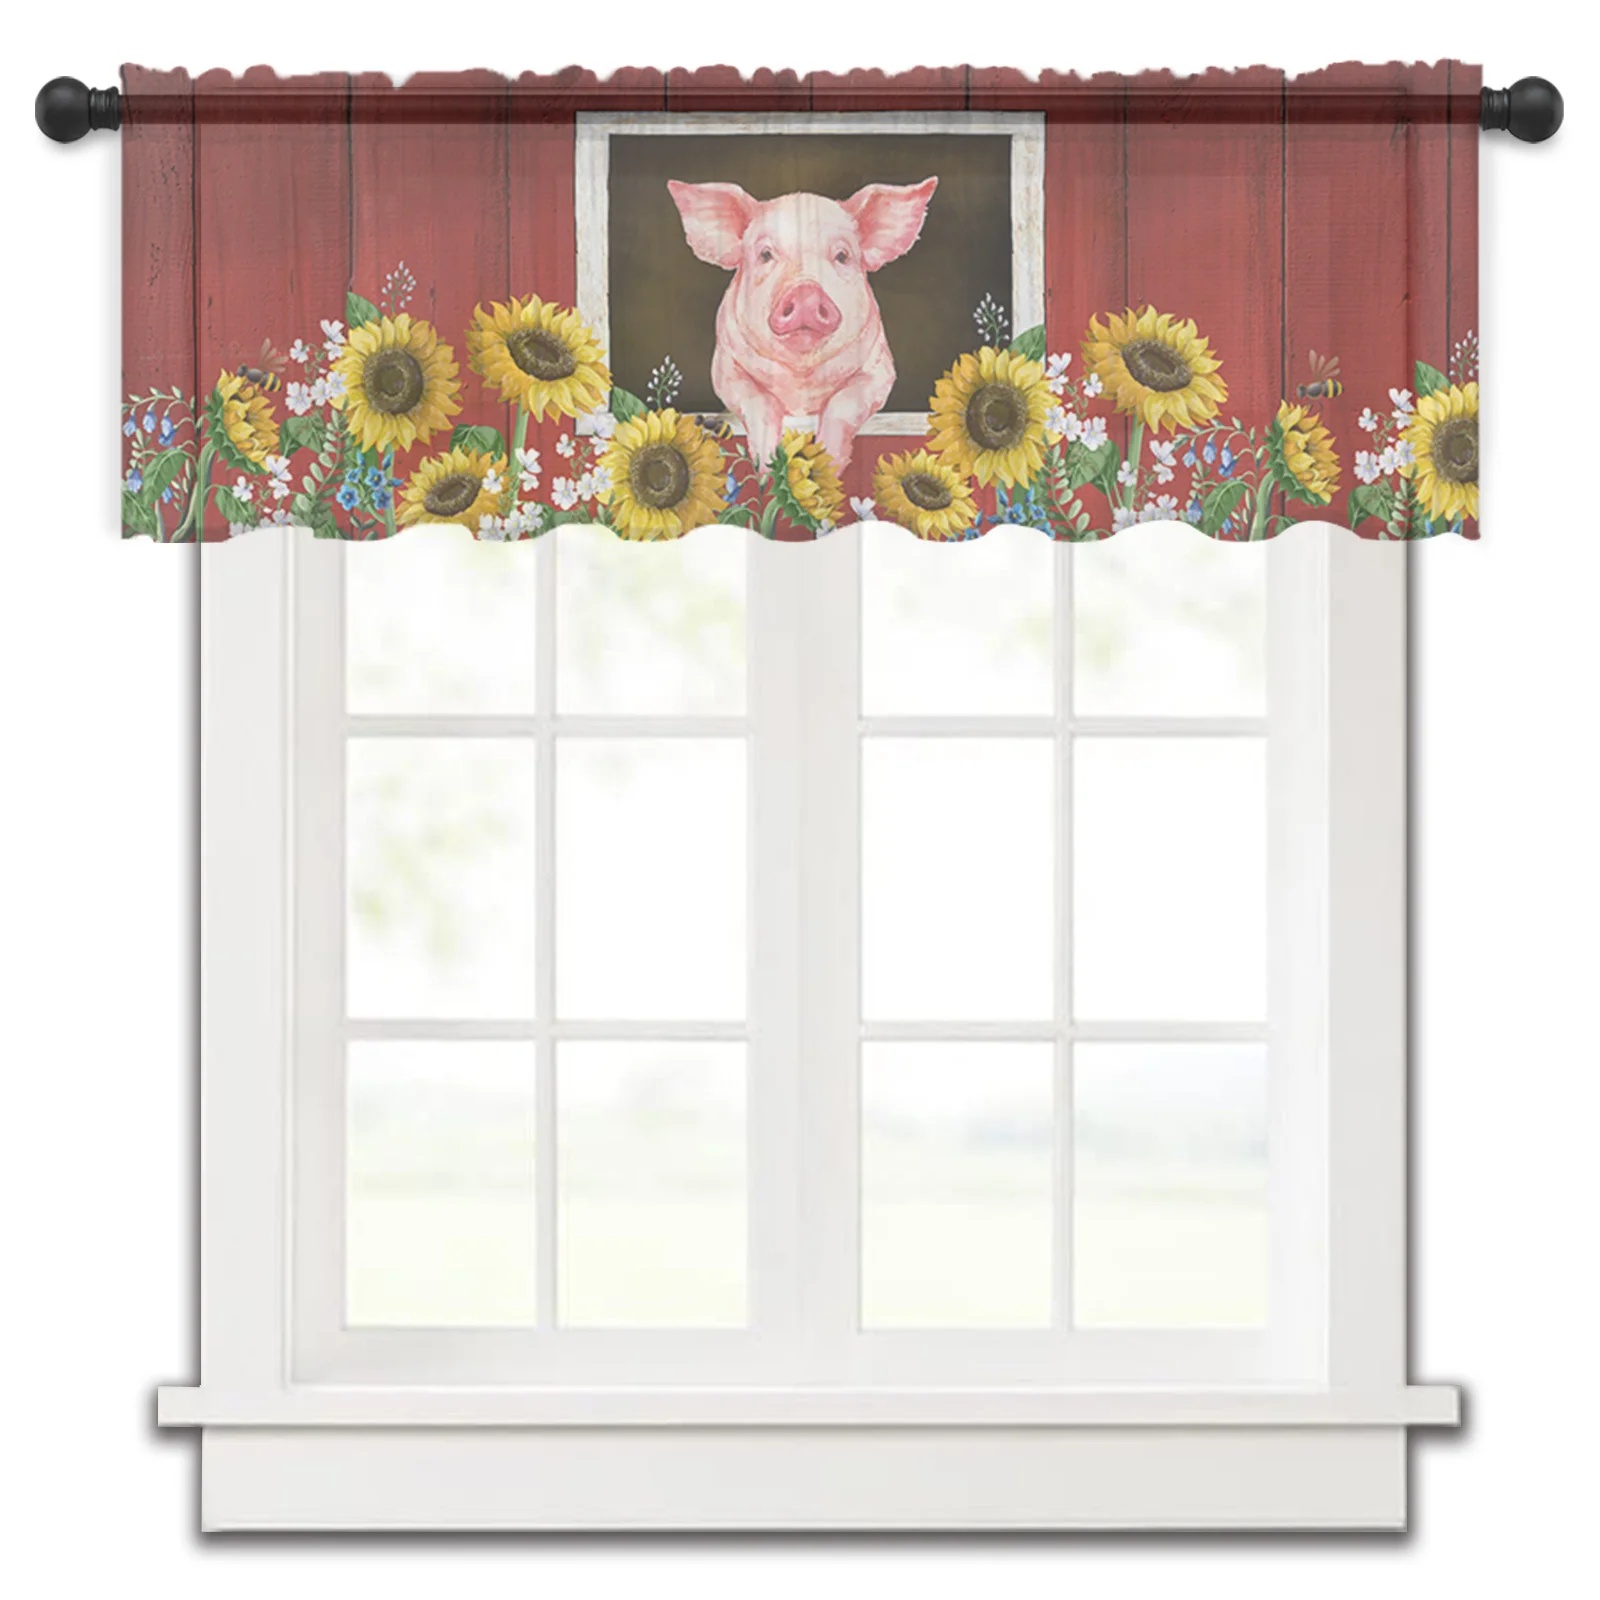 

Pig And Sunflower Farm Idyllic Barn Kitchen Small Curtain Tulle Sheer Short Curtain Bedroom Living Room Home Decor Voile Drapes